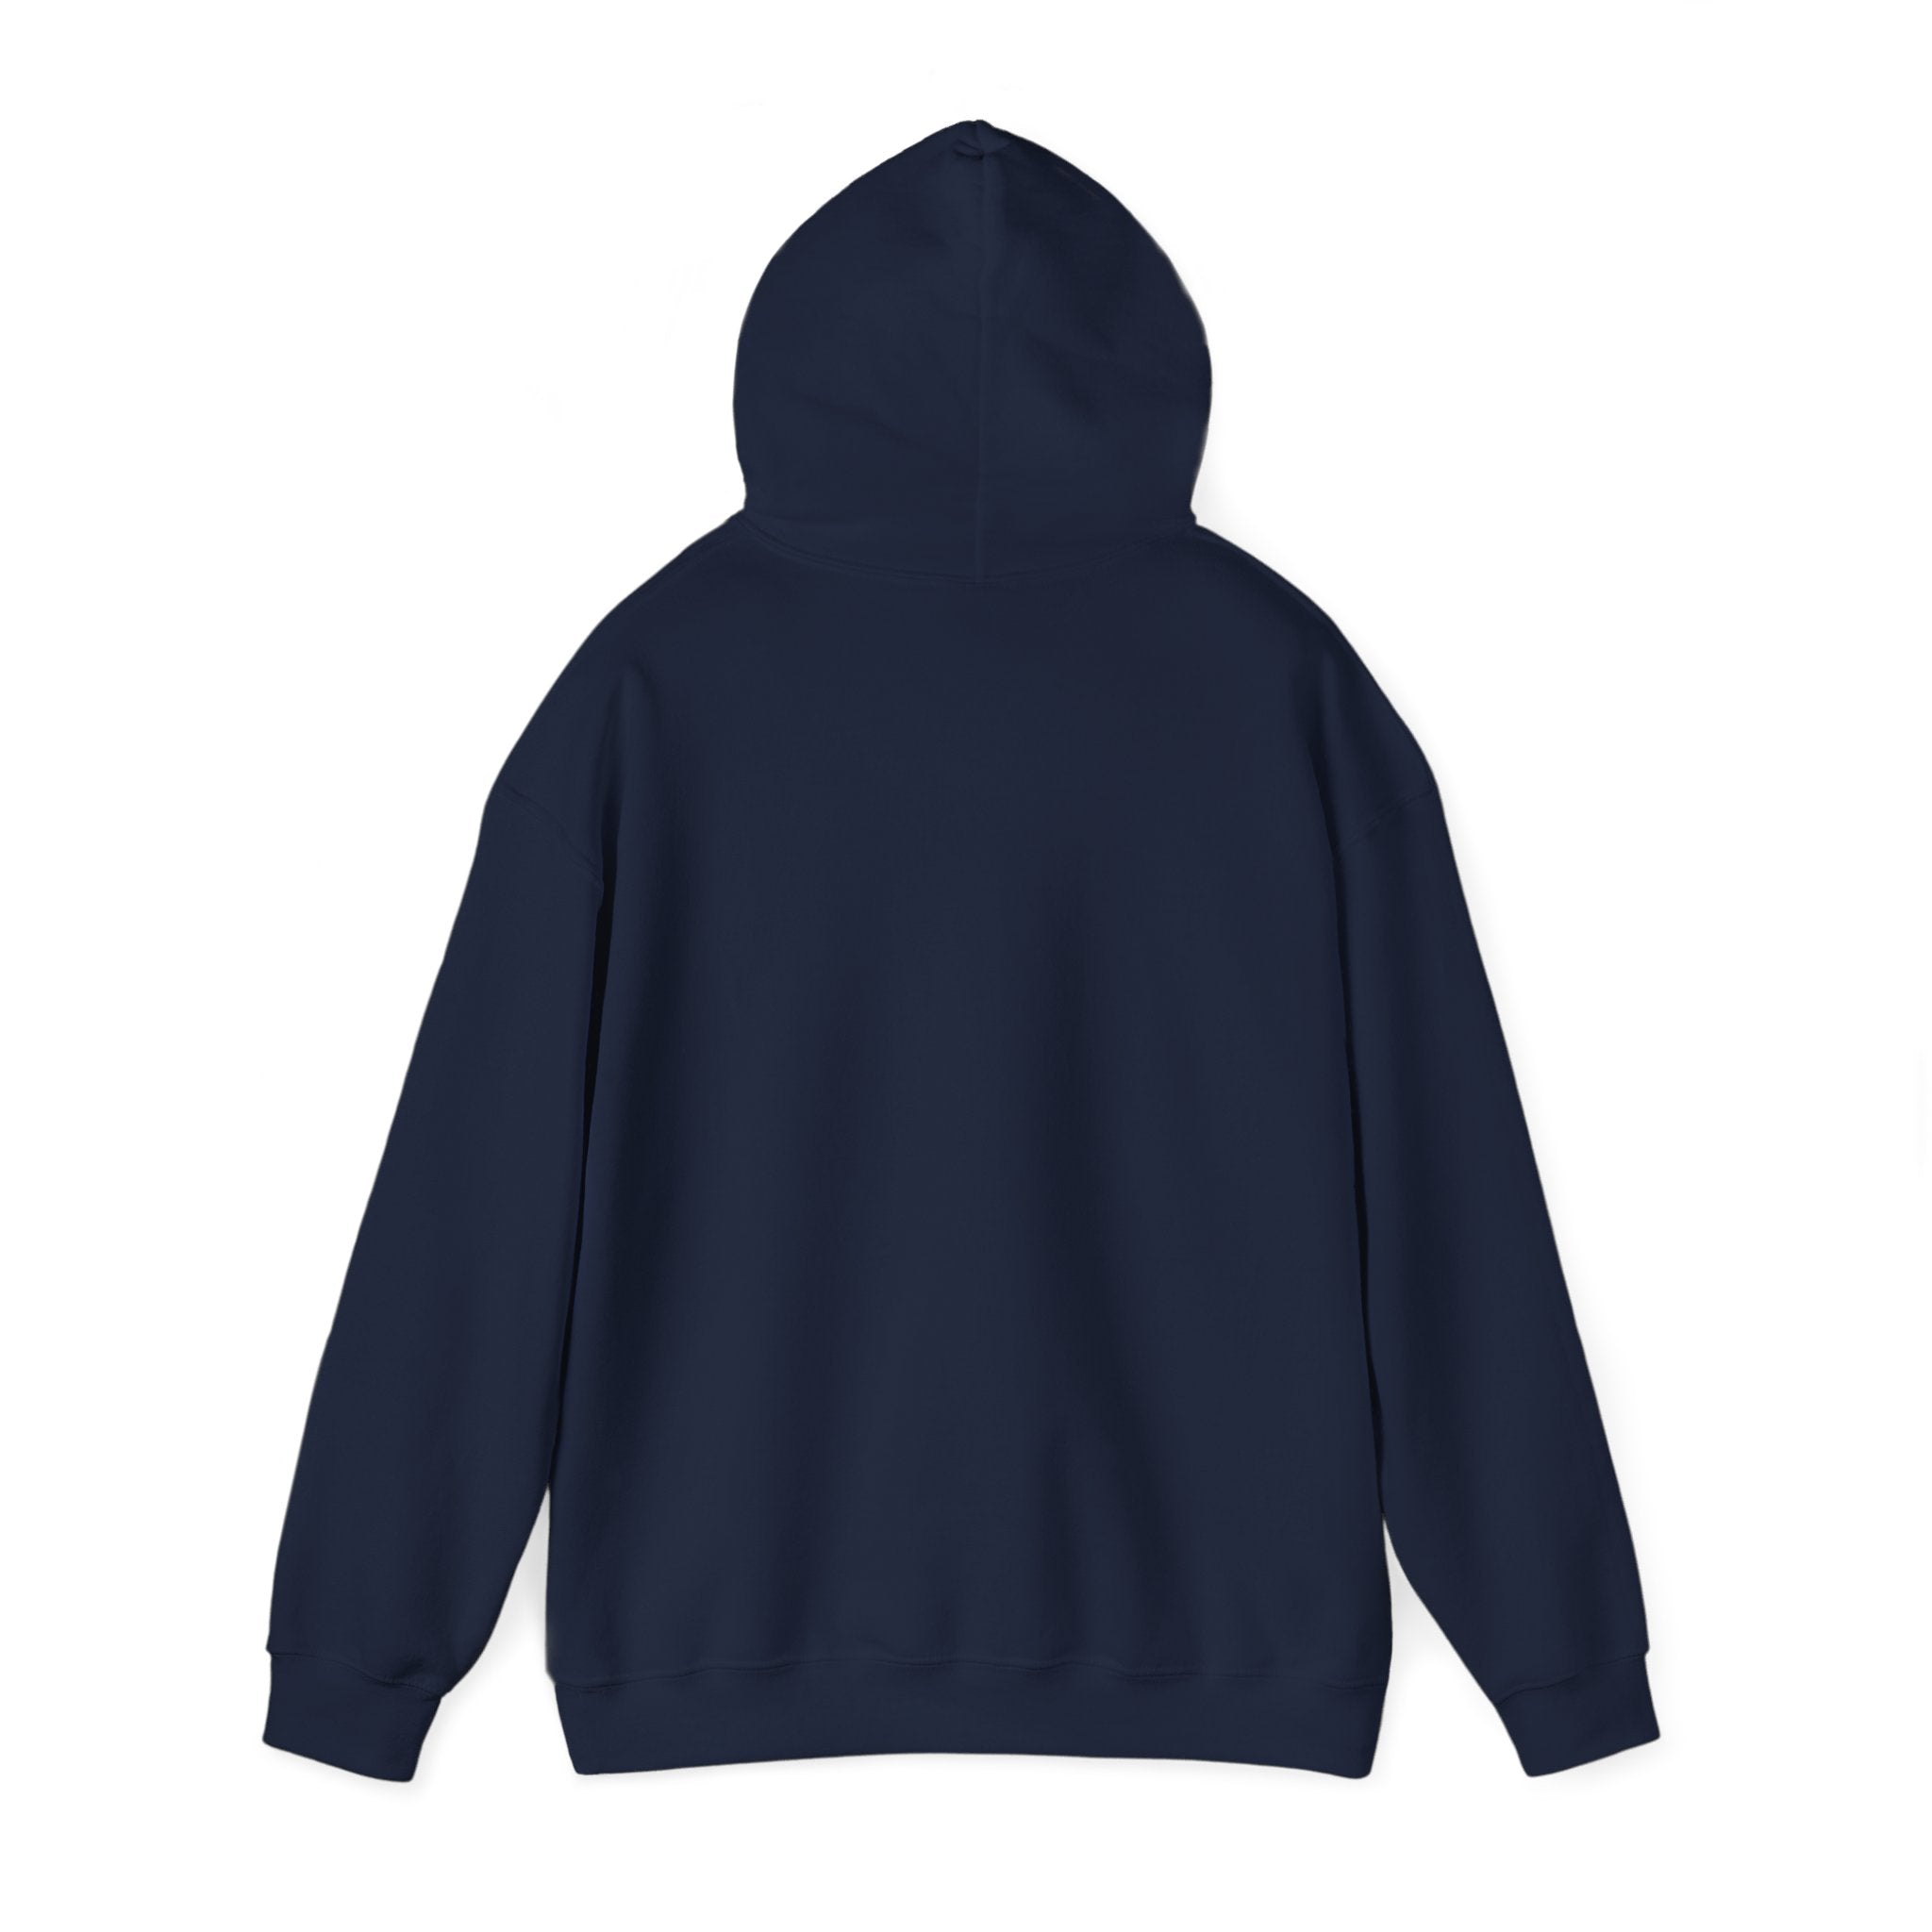 Back view of a Semaphore - Hooded Sweatshirt, showcasing a cozy classic fit with a hood and long sleeves, blending style and comfort.